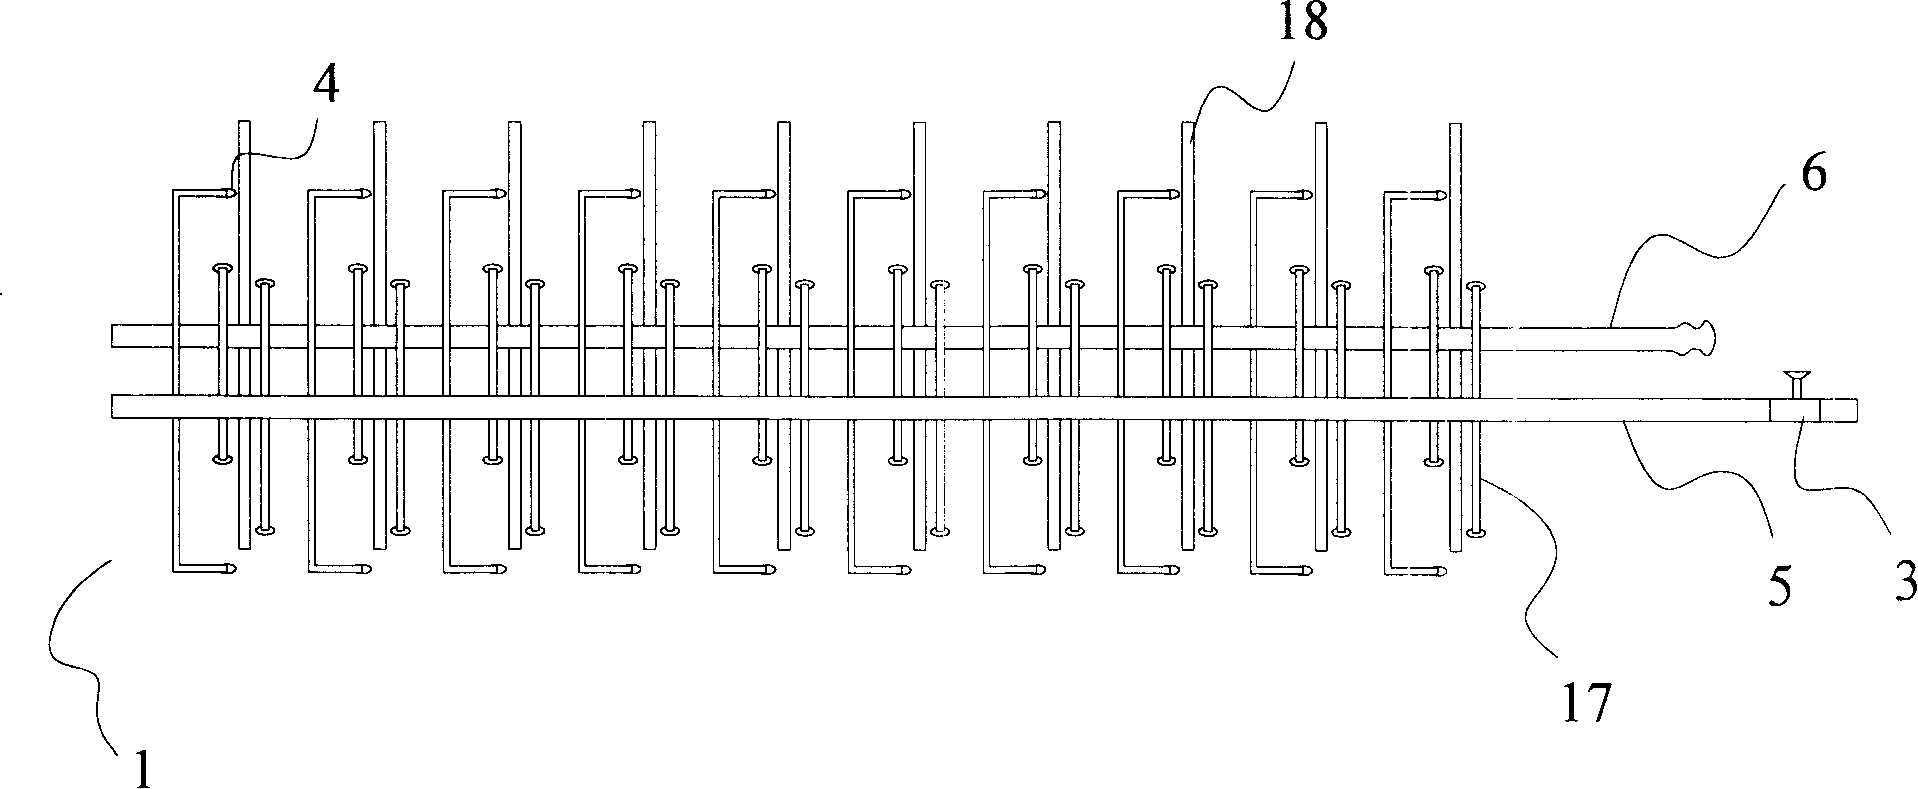 Air flow filling and sucking type foundation draining method